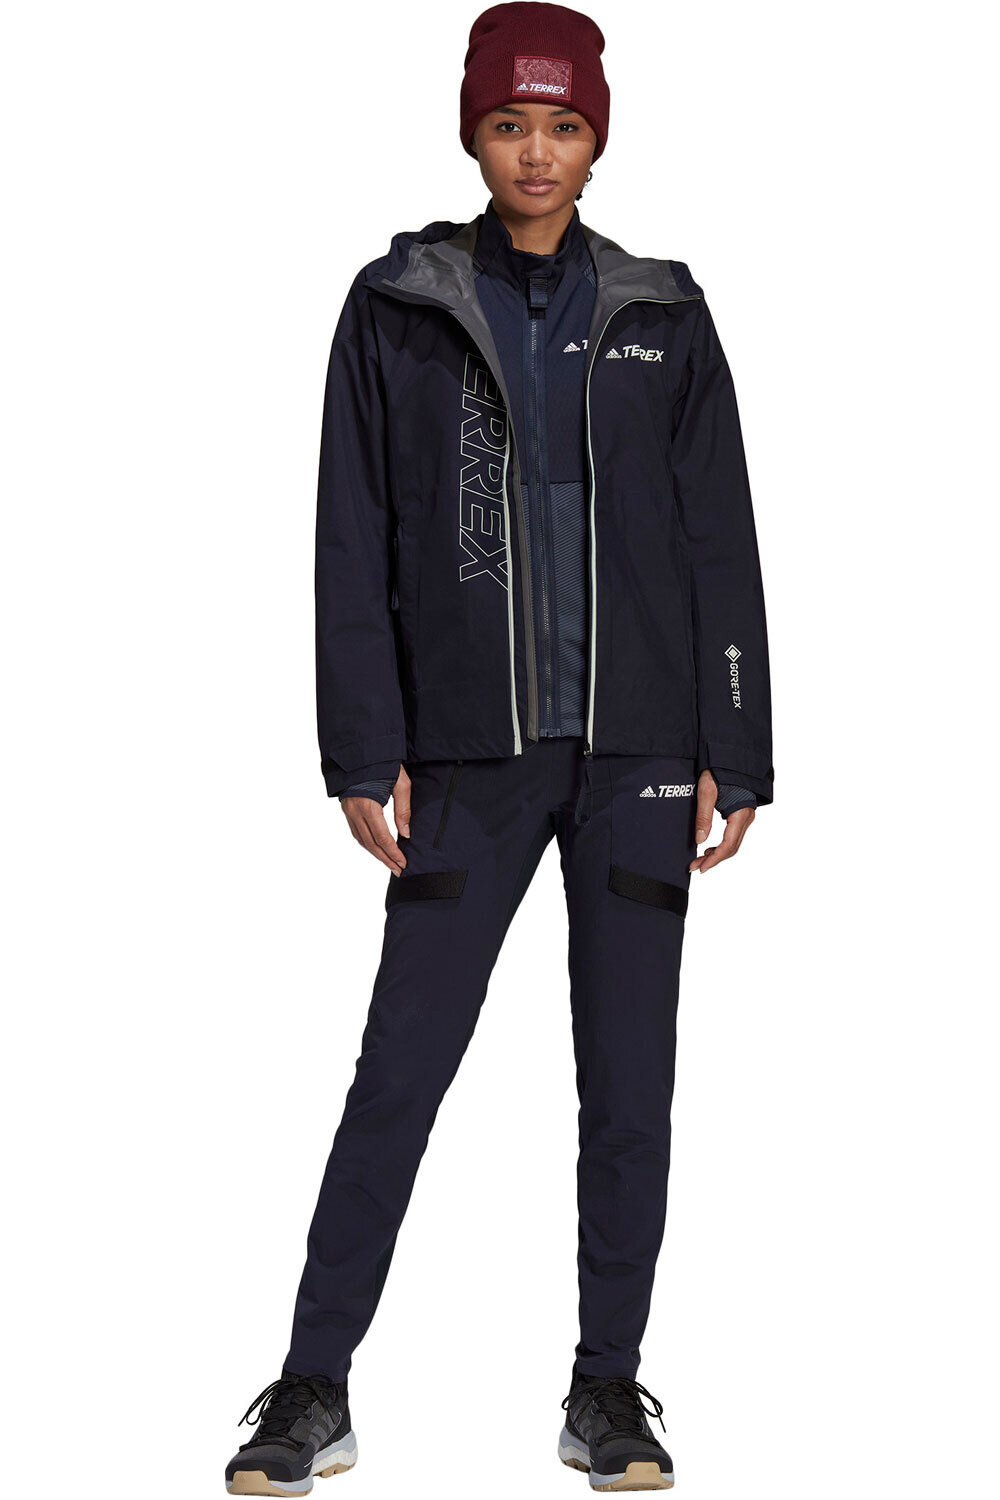 adidas chaqueta impermeable mujer Terrex GORE-TEX Paclite impermeable vista trasera